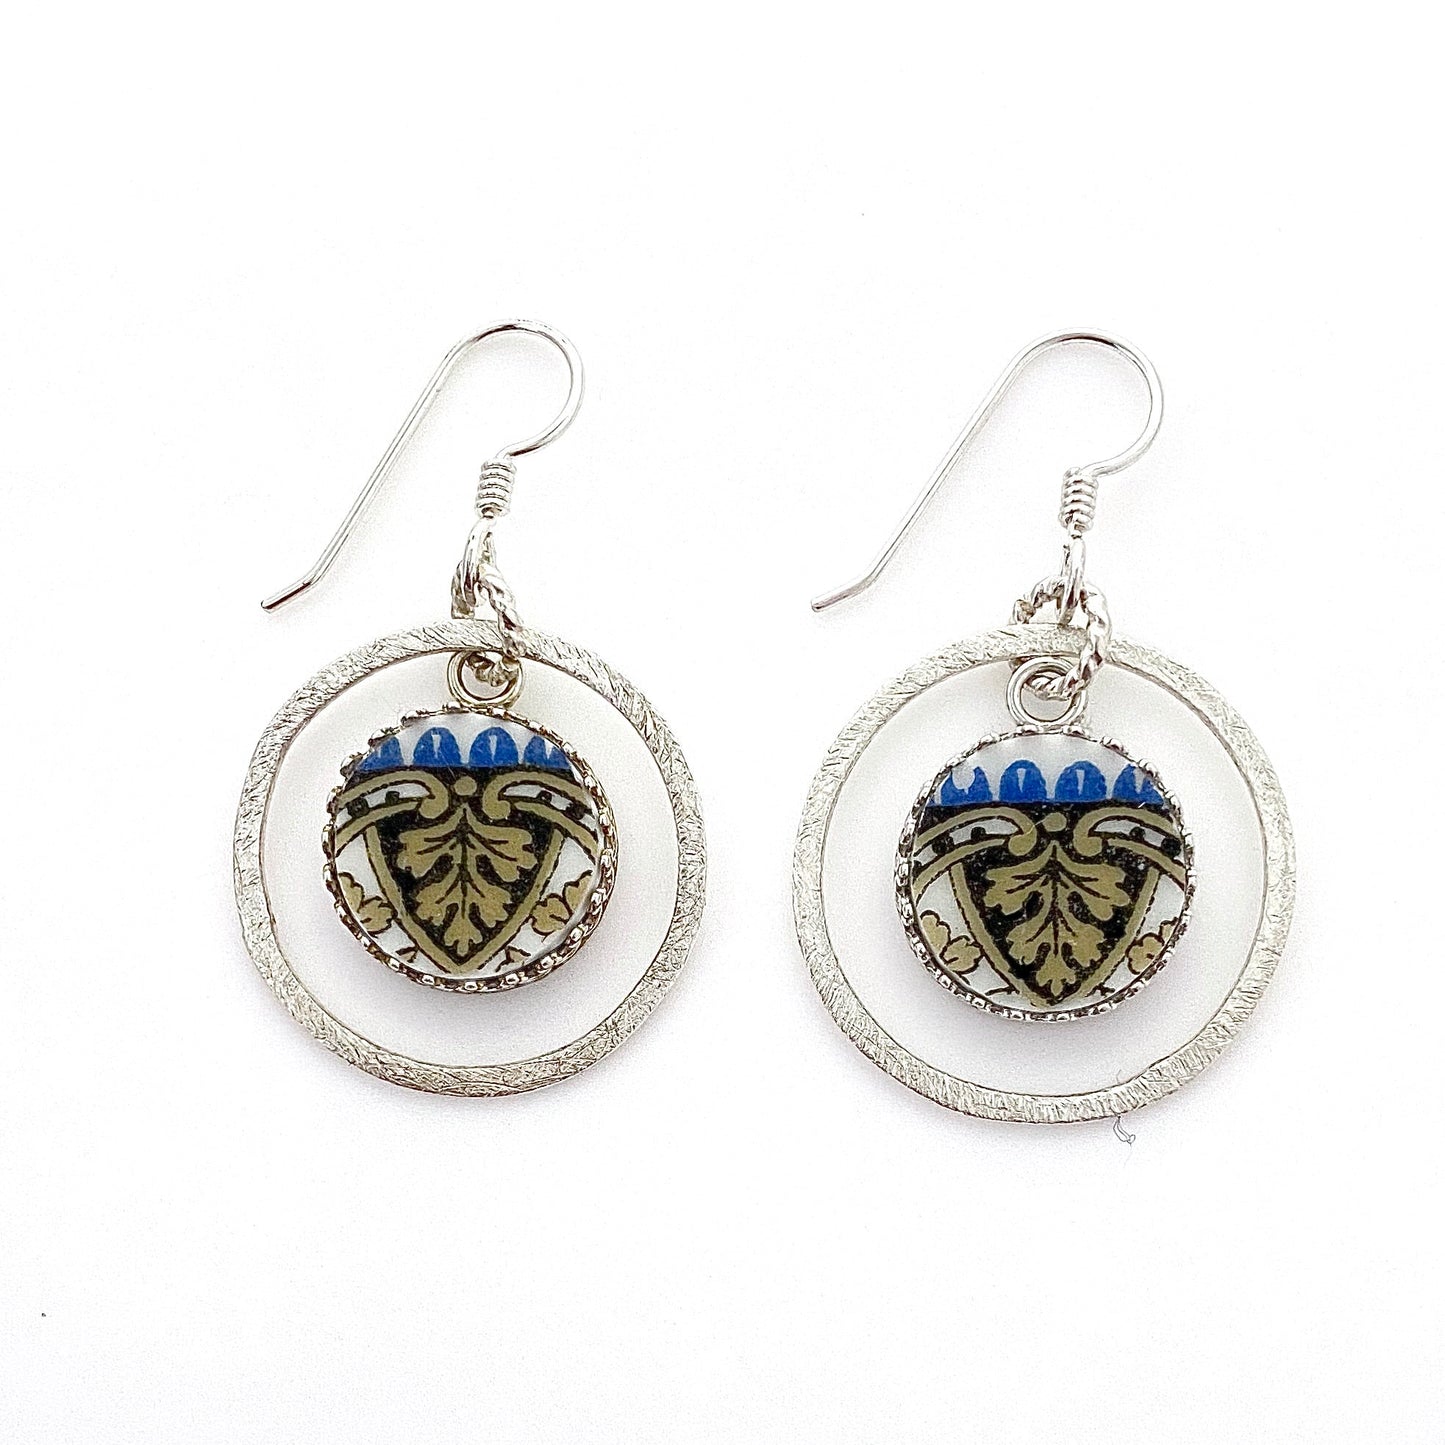 French Limoges China, Sterling Silver Circle Earrings, Unique Anniversary Gifts, Gift for Her